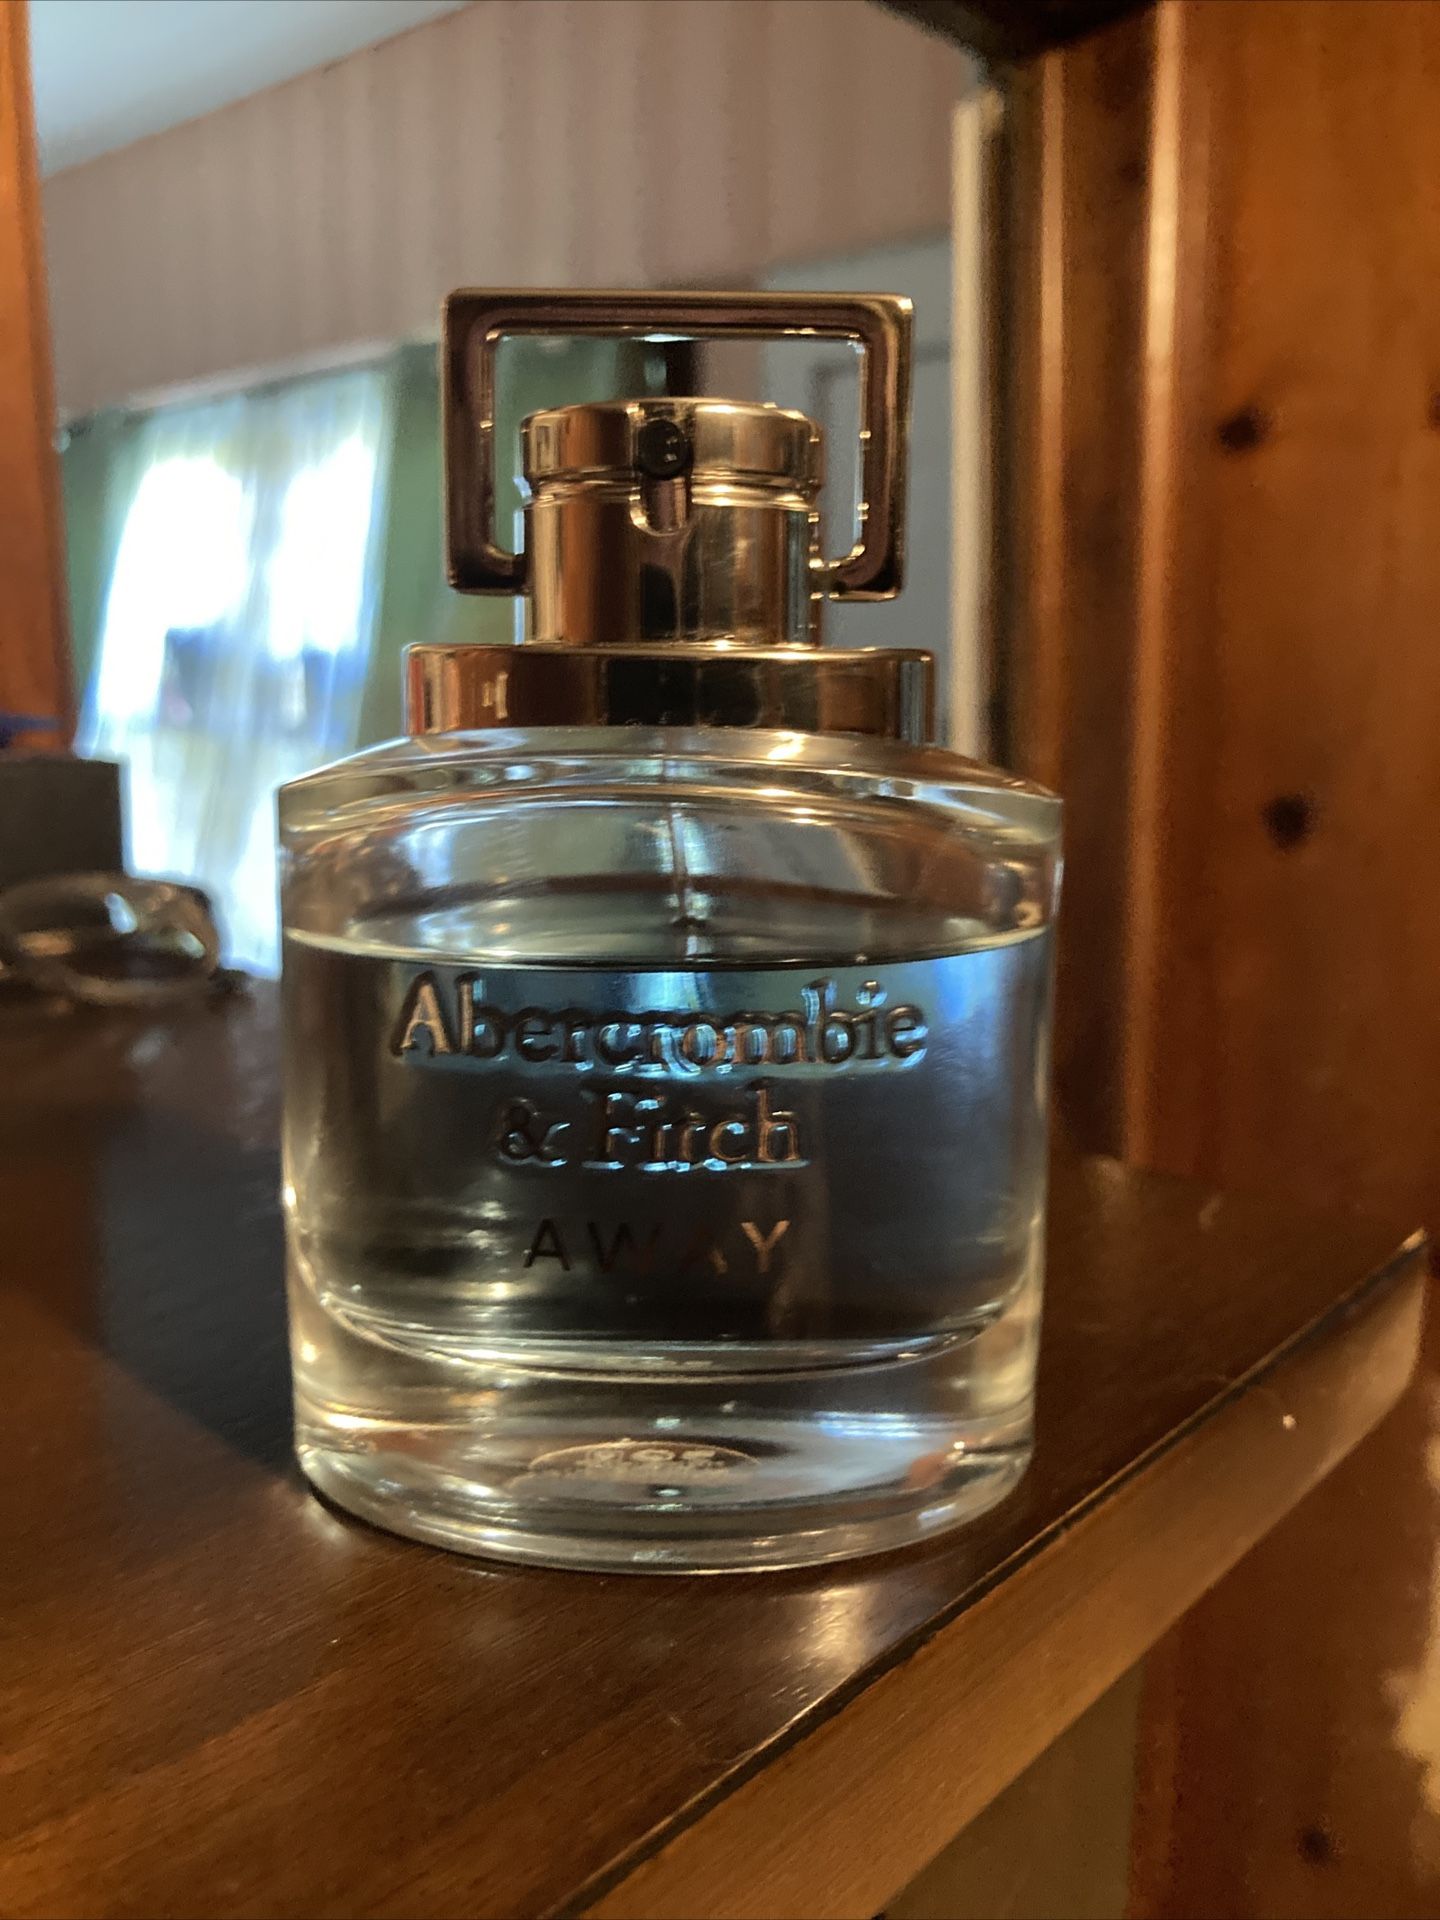 Abercrombie & Fitch Away Edt